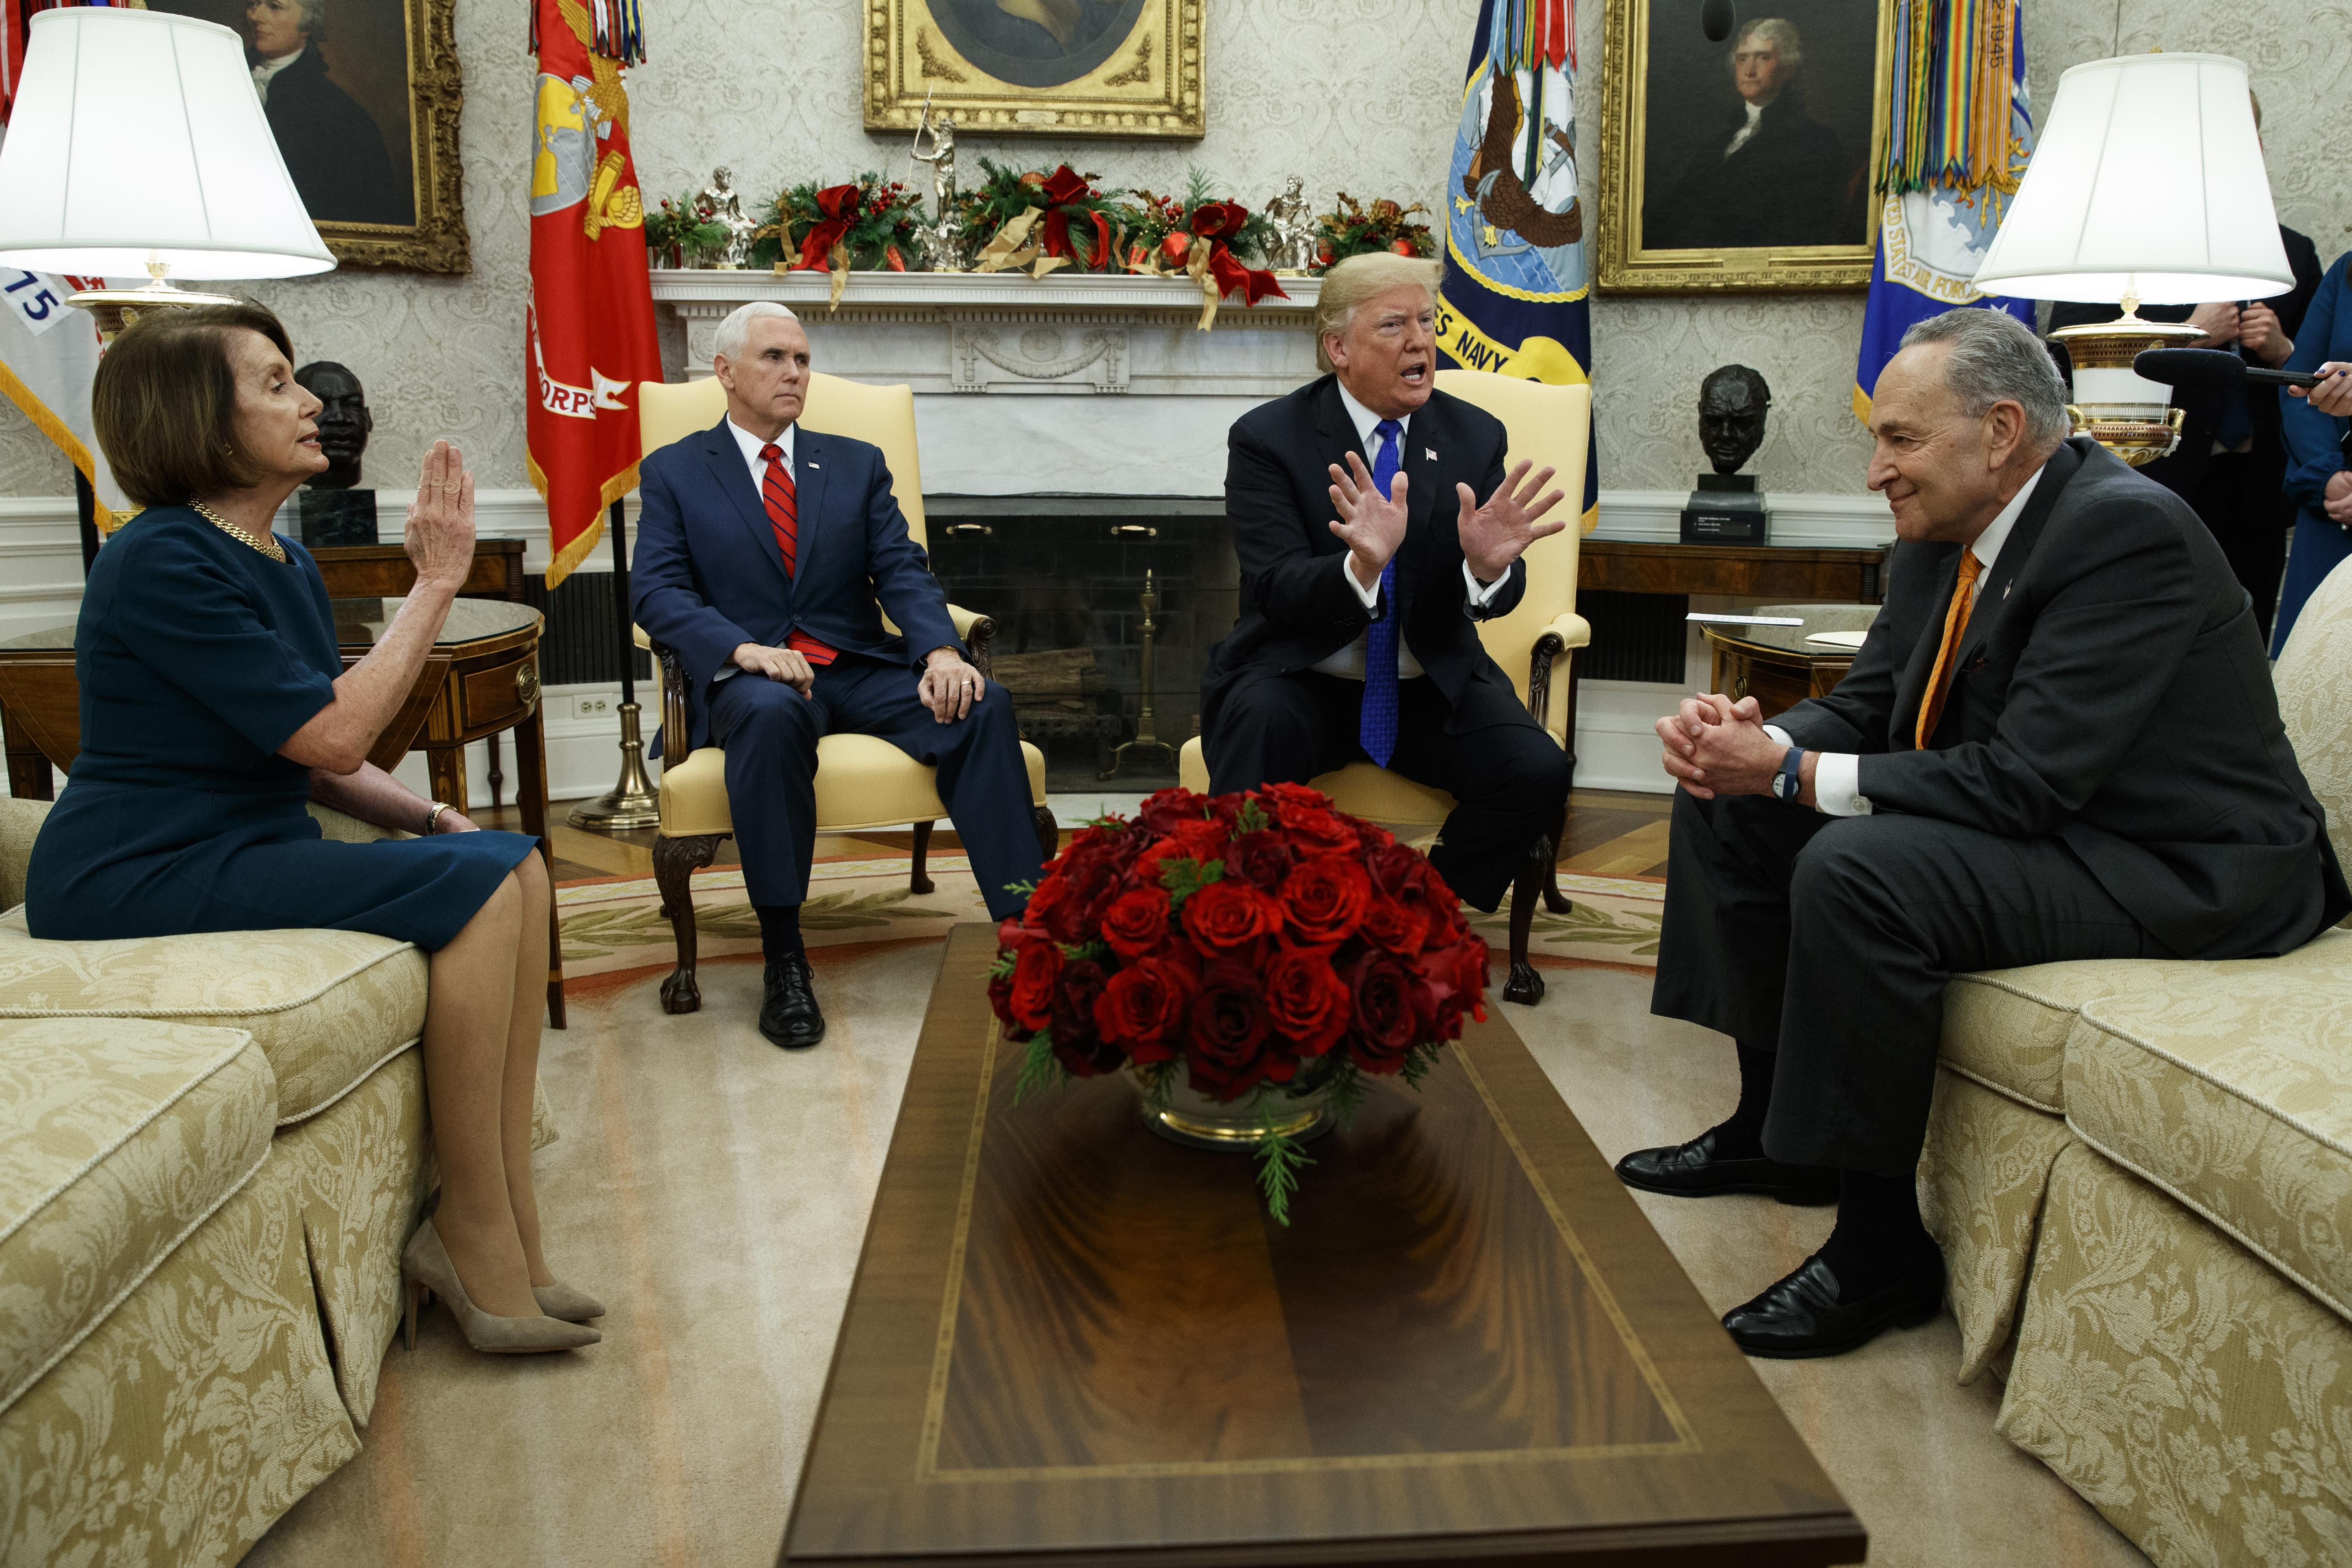 House Minority Leader Rep. Nancy Pelosi, D-Calif., Vice President Mike Pence, President Donald Trump, and Senate Minority Leader Chuck Schumer, D-N.Y., argue during a meeting in the Oval Office of the White House